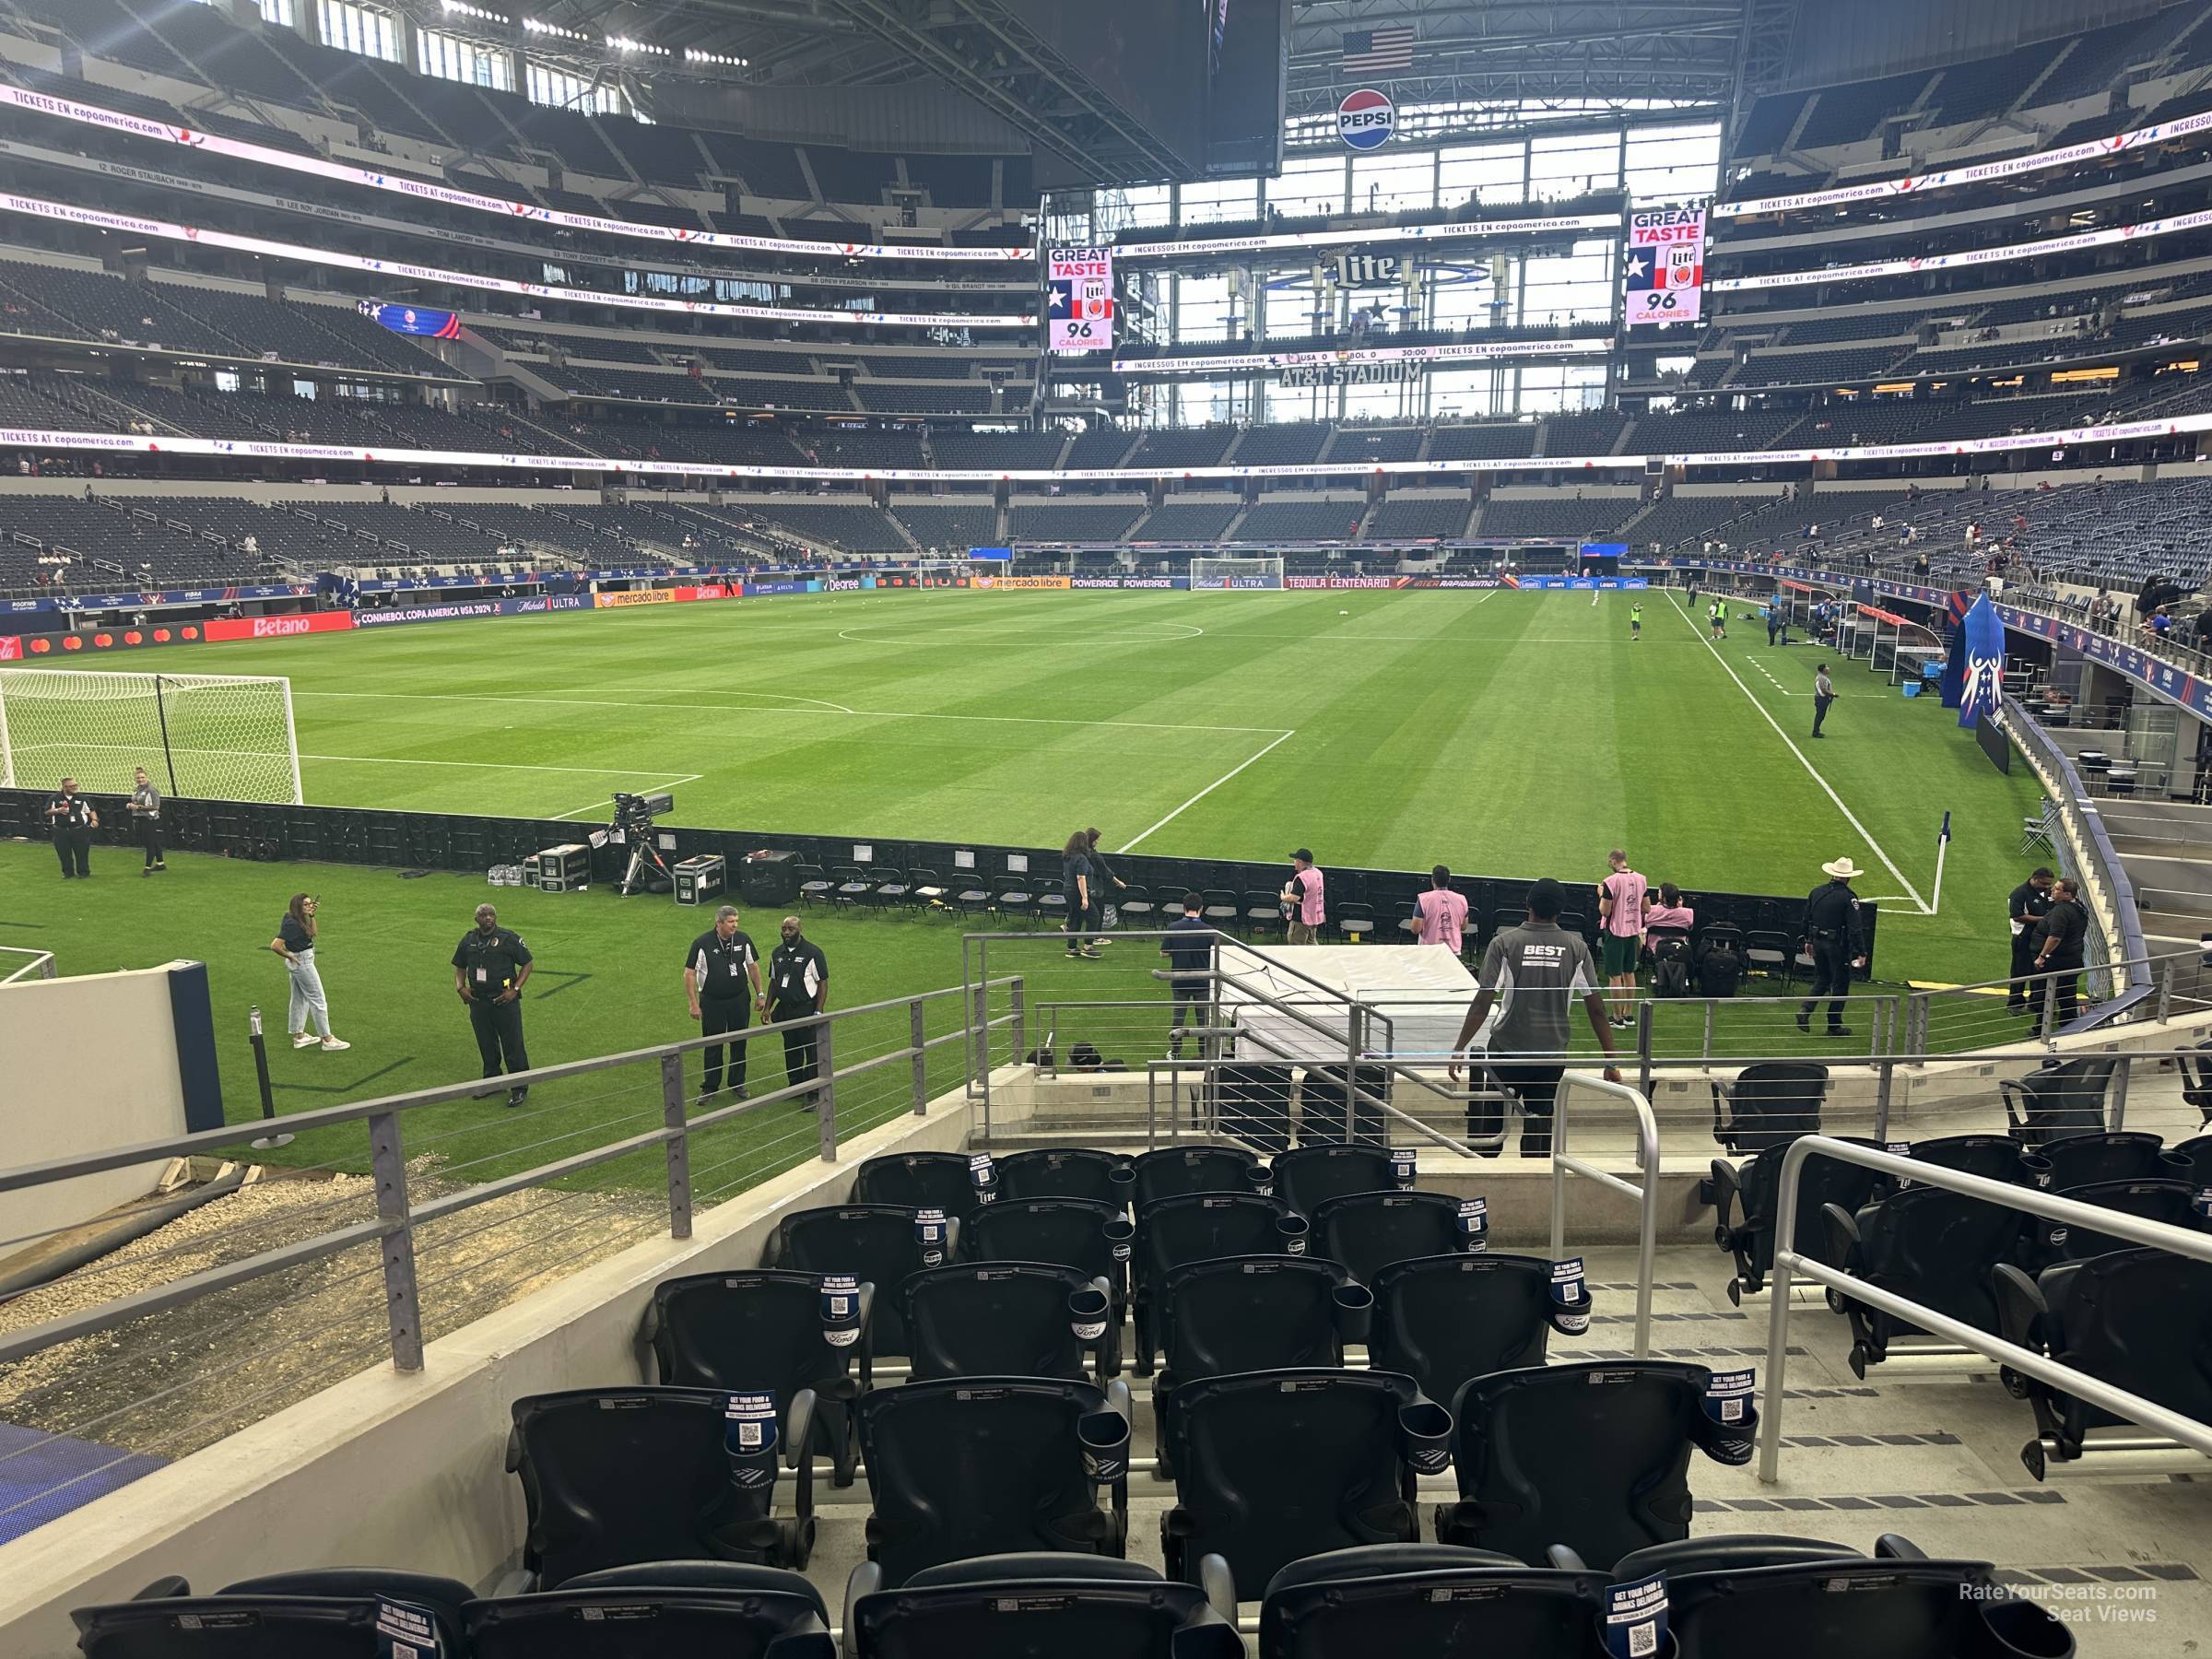 section 146, row 11 seat view  for soccer - at&t stadium (cowboys stadium)